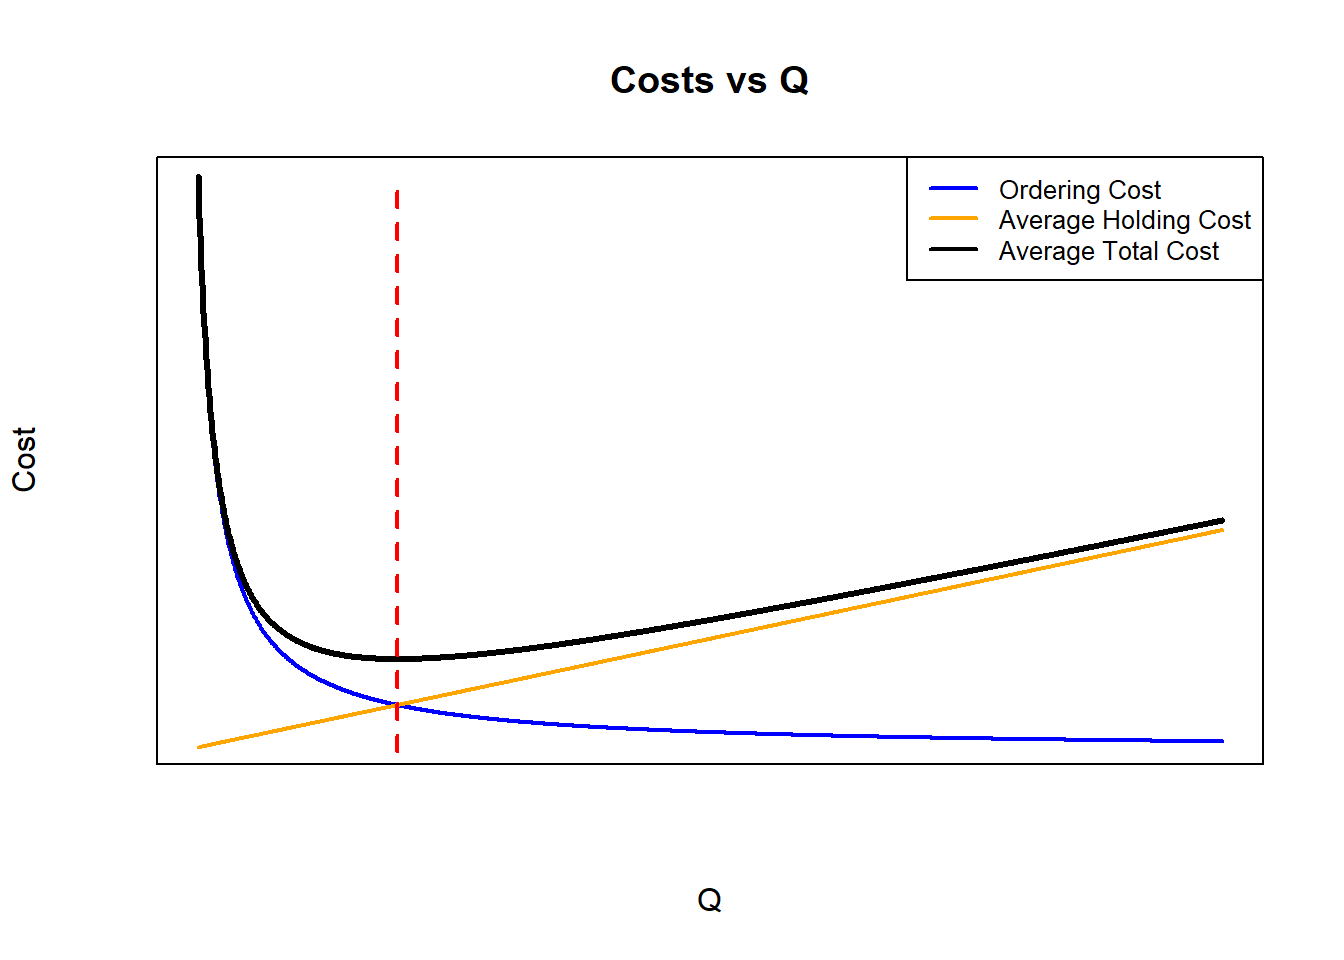 Average Total Cost, Average Holding Cost and Ordering Cost vs Q